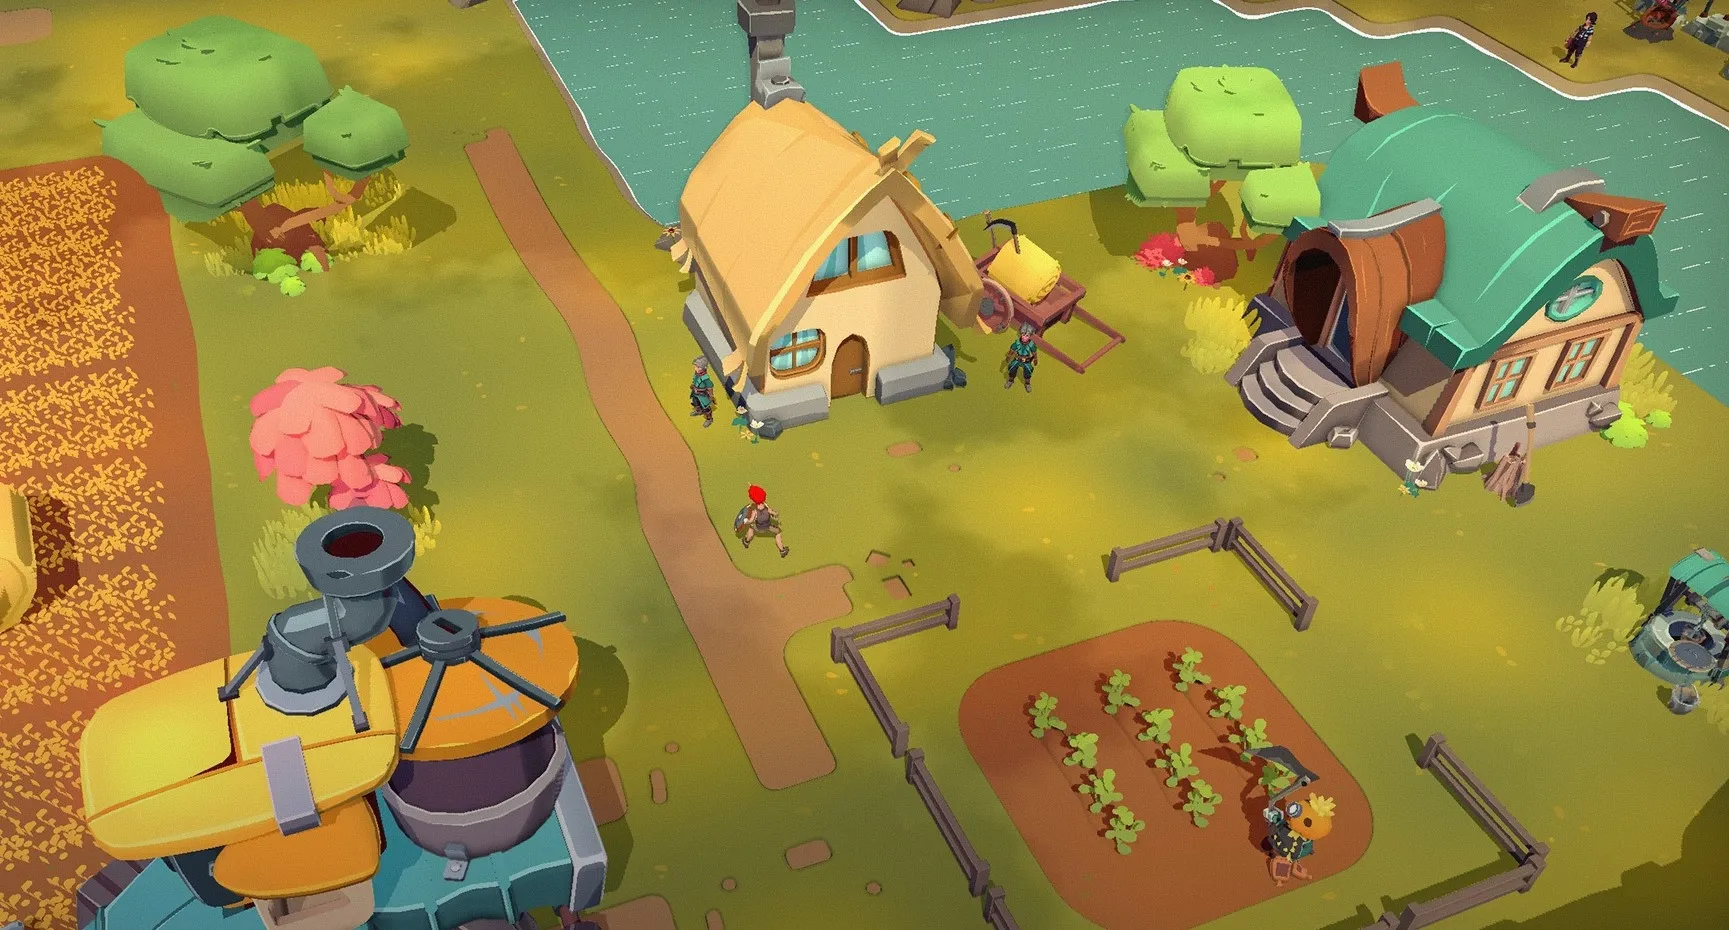 In Ember Sword, Homes are scattered across different areas of Thanabus. Some of these allow players to farm and harvest crops for crafting ingredients.